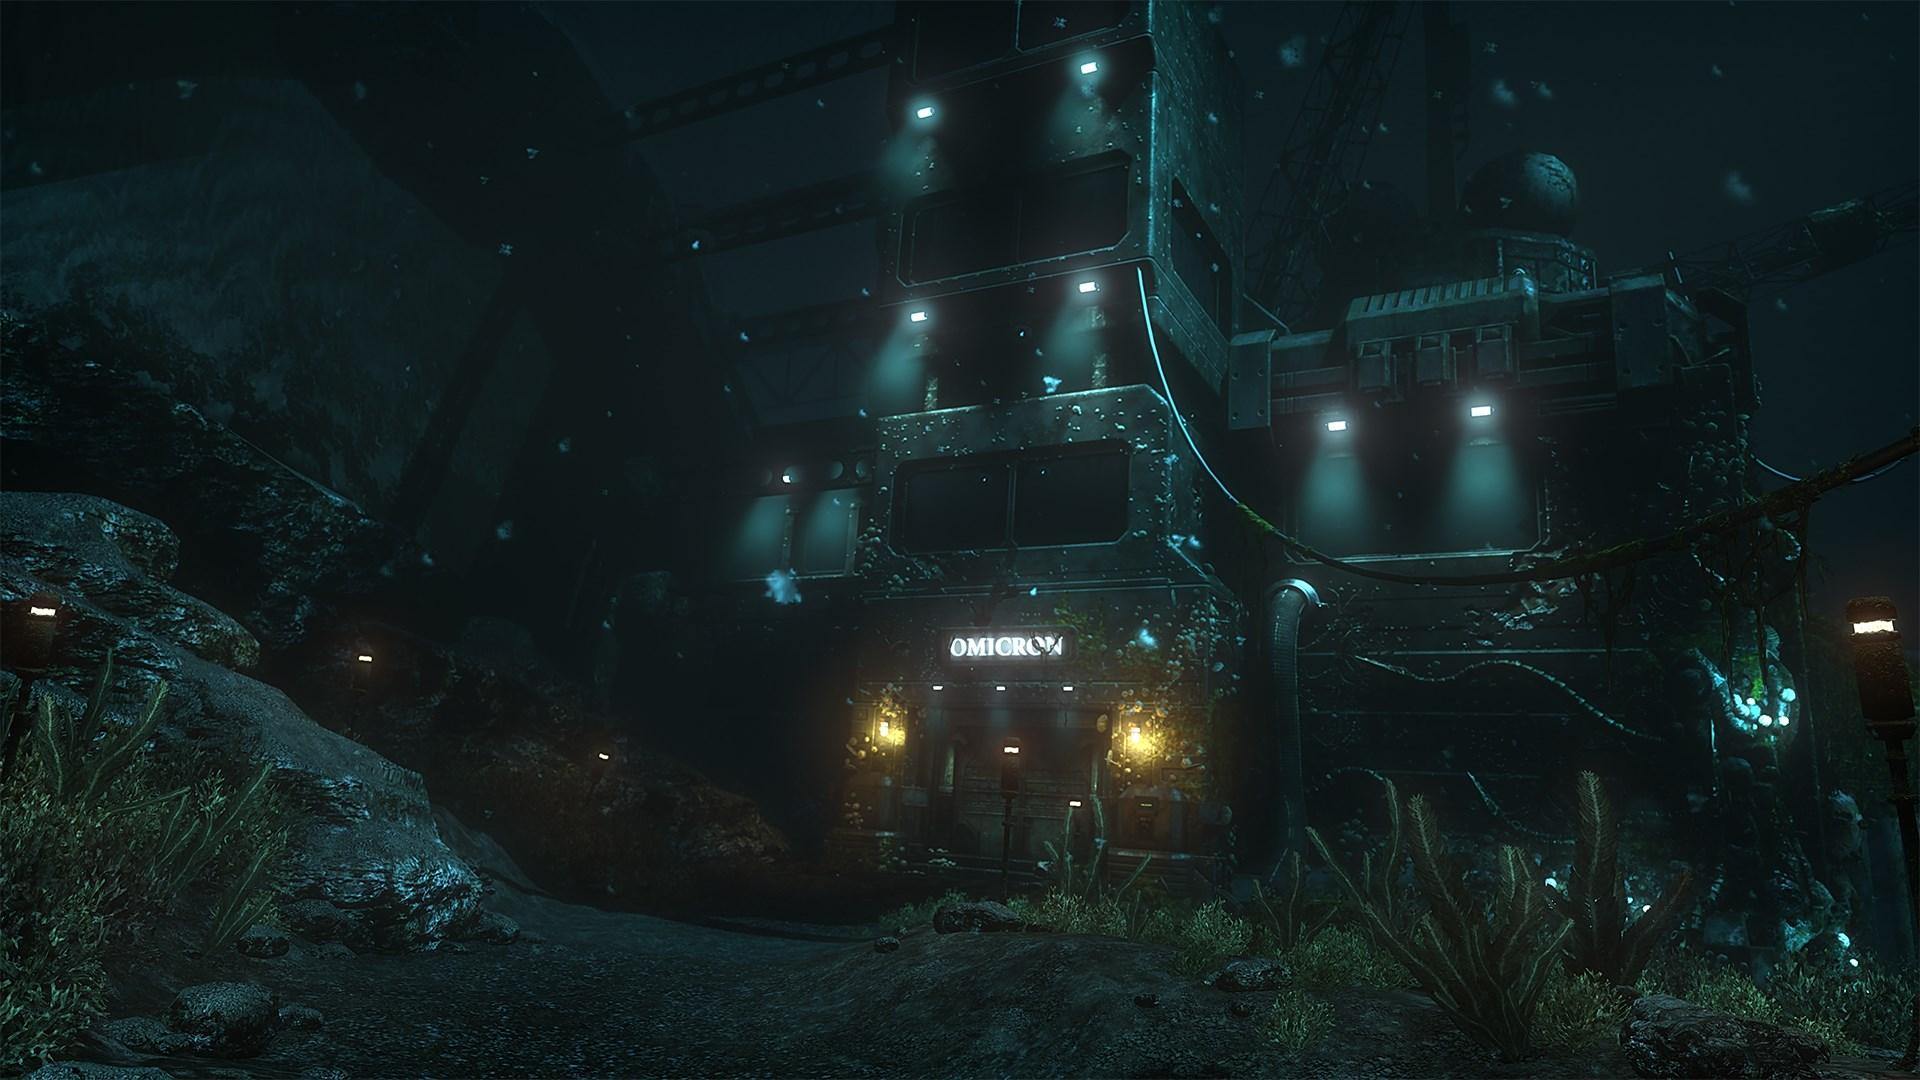 SOMA Wallpapers